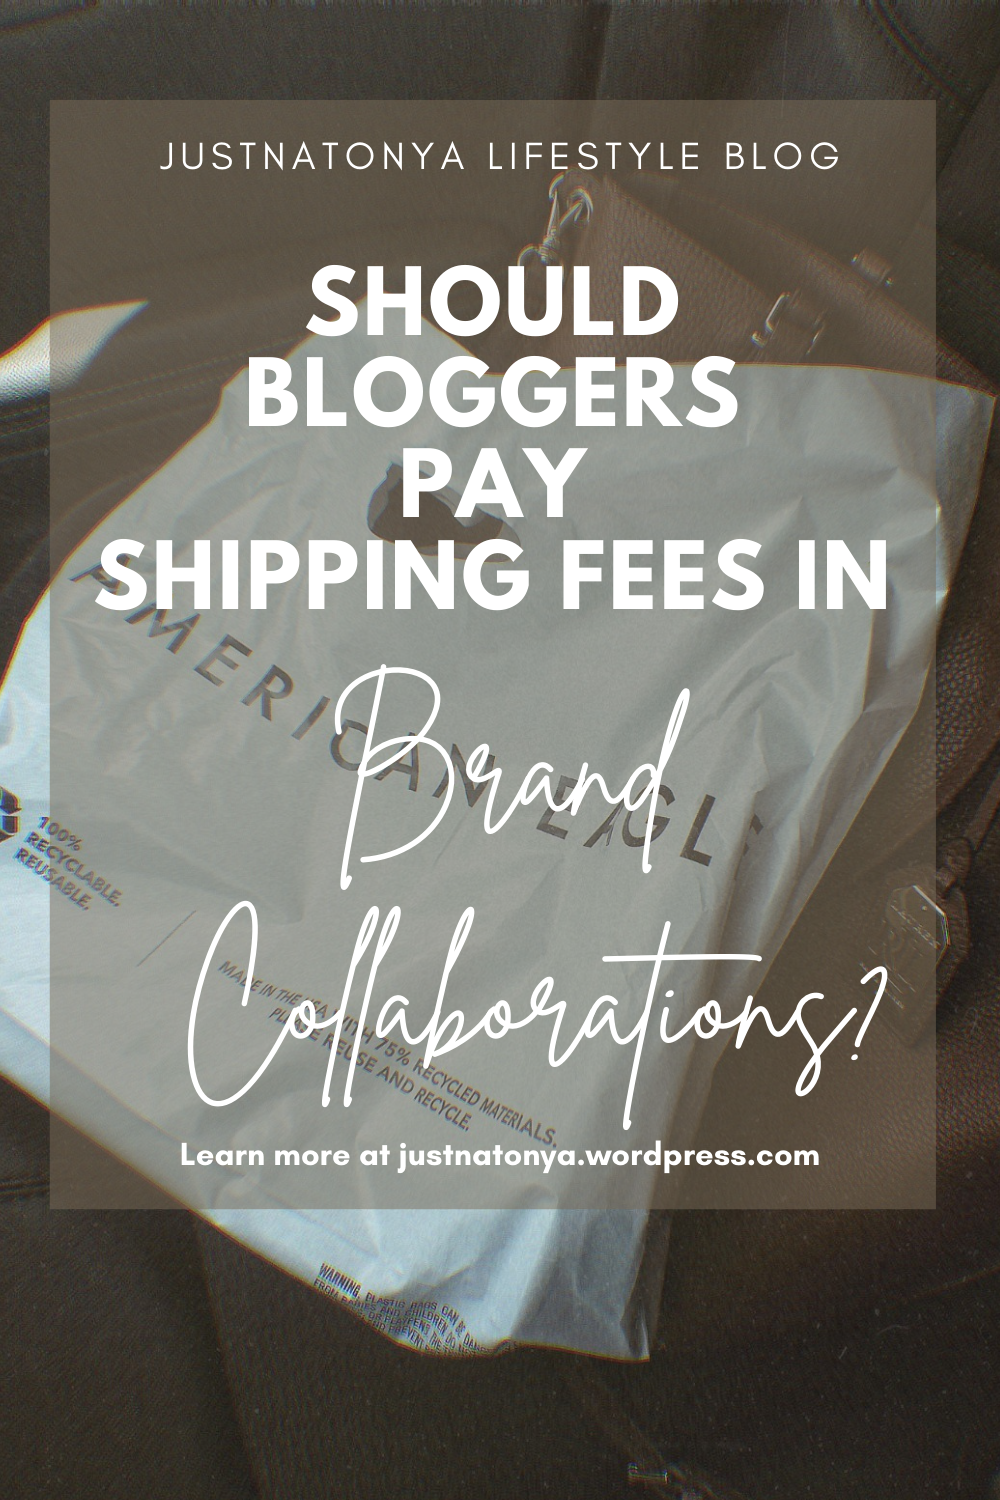 Am I Supposed to Pay a Shipping Fee for Products in Brand Collaborations?